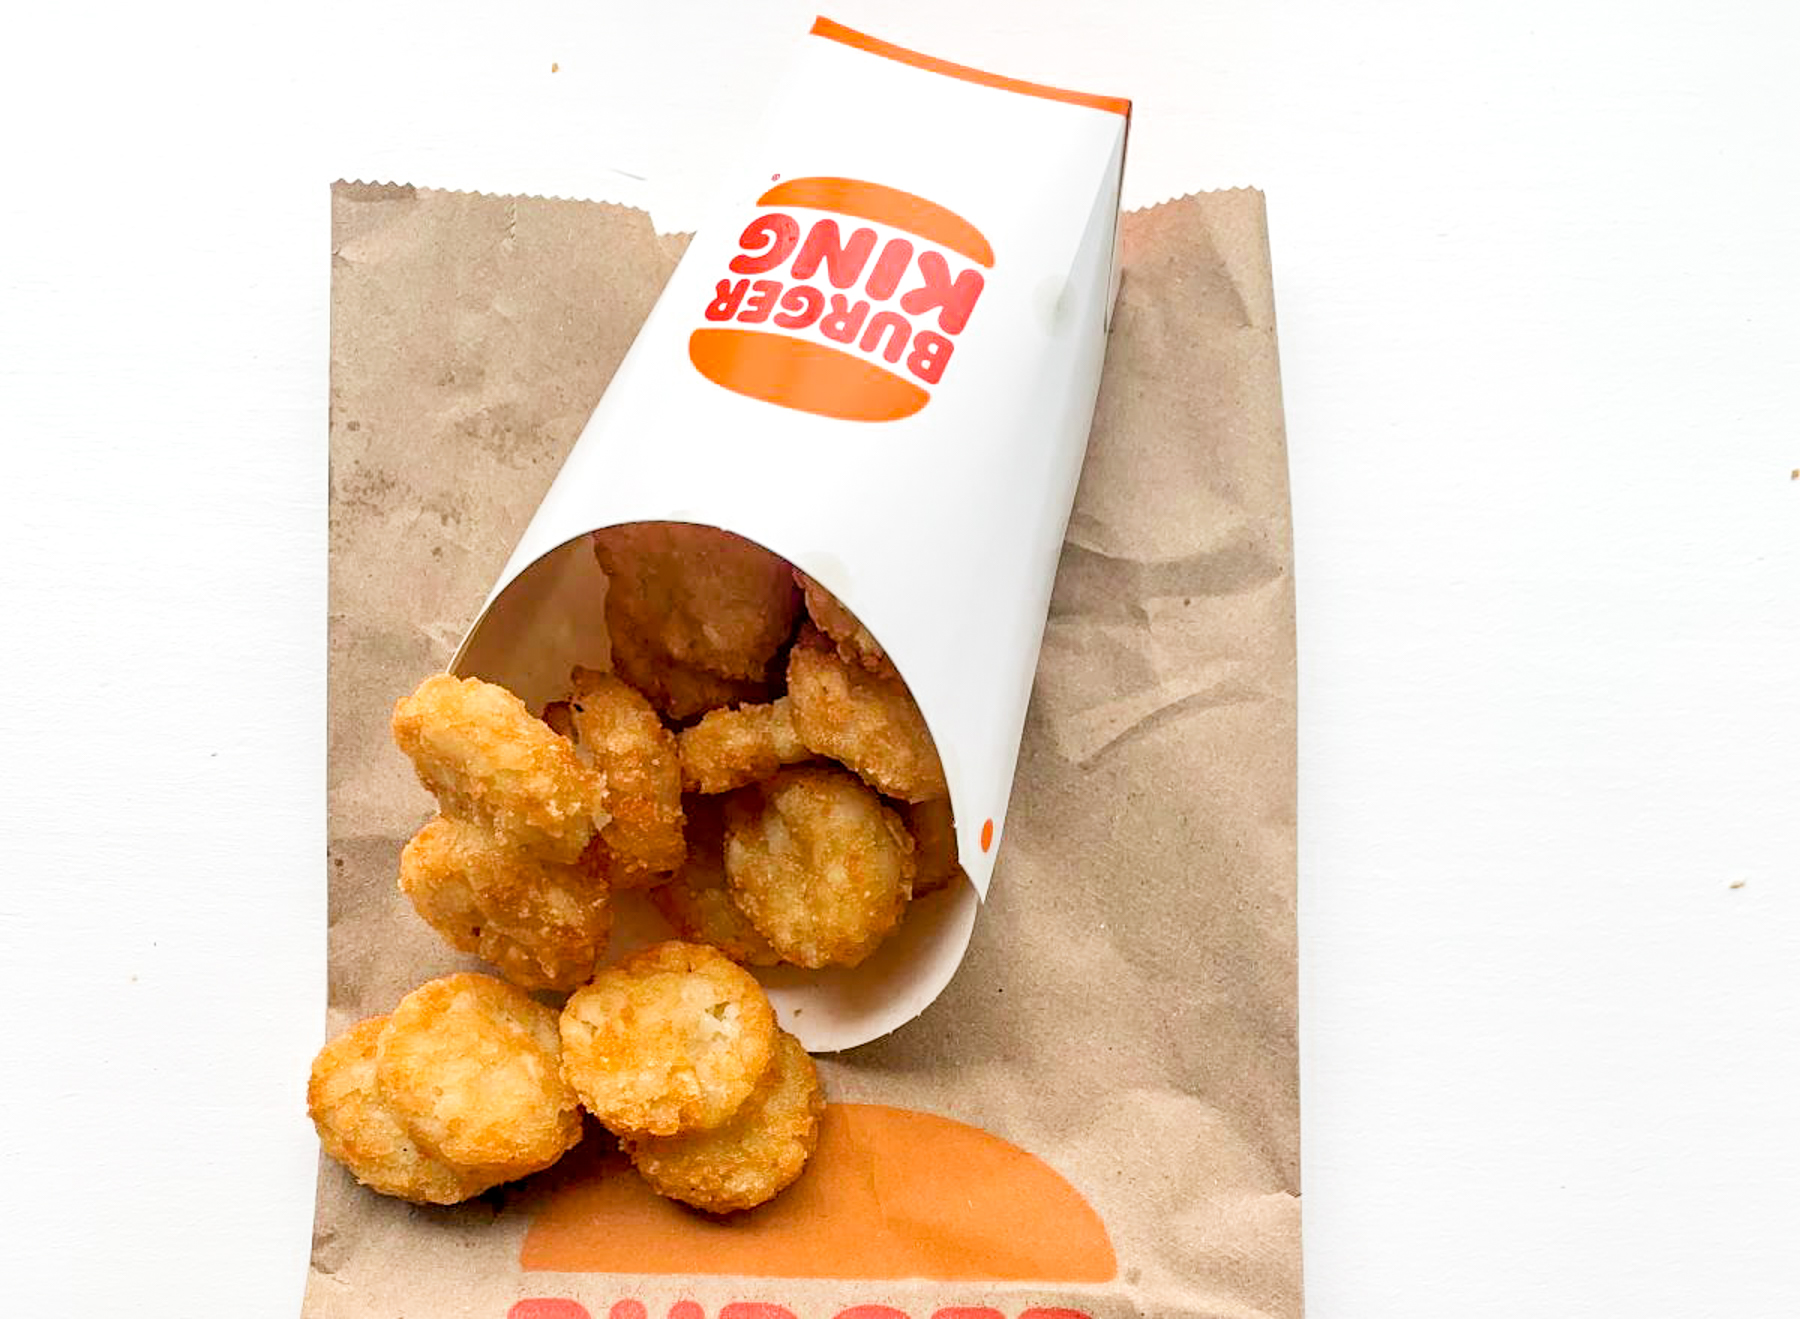 I Tasted 5 Fast Food Hash Browns And This One Is The Best — Eat This Not That